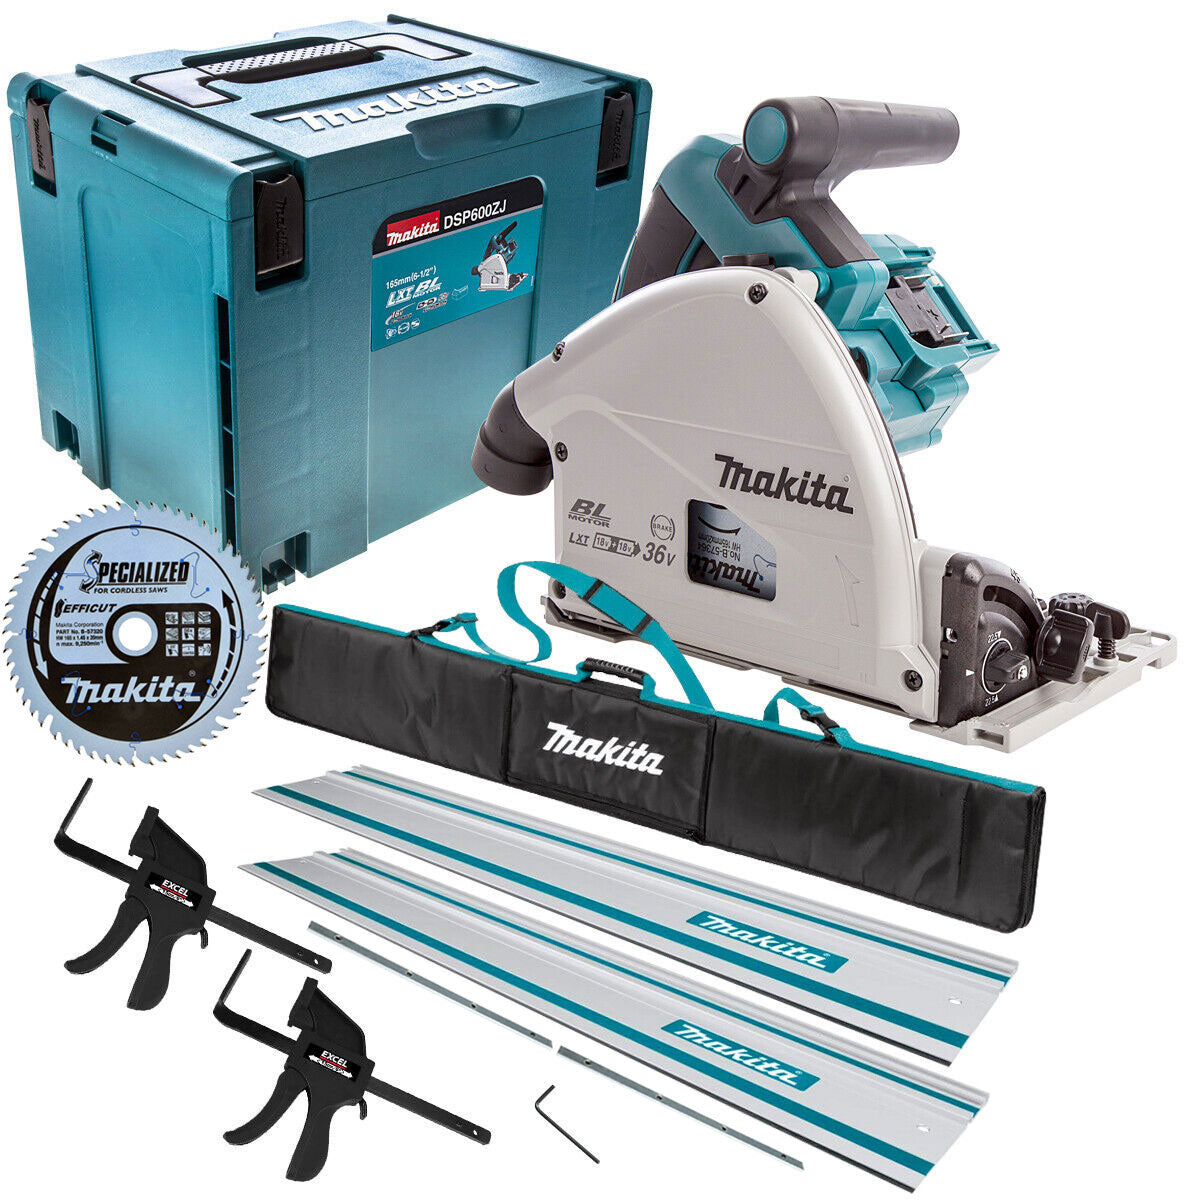 Makita DSP600ZJ 36V Brushless 165mm Plunge Saw with 2x1.5m Guide Rail+Clamp+Bag+Blade